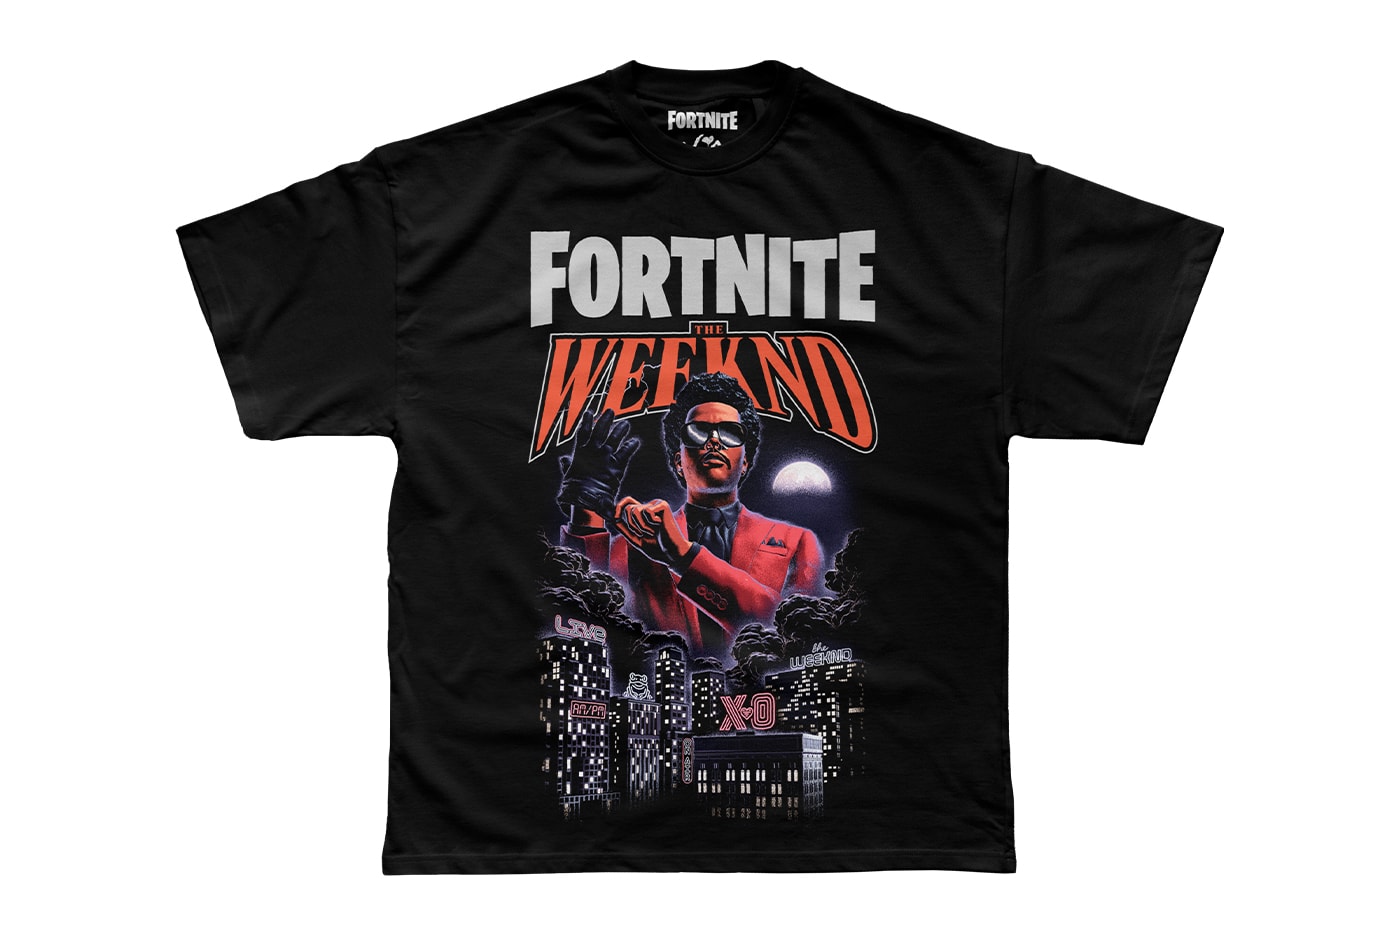 The Weeknd and ‘Fortnite’ Continue Their Partnership With Merch Collab Fashion